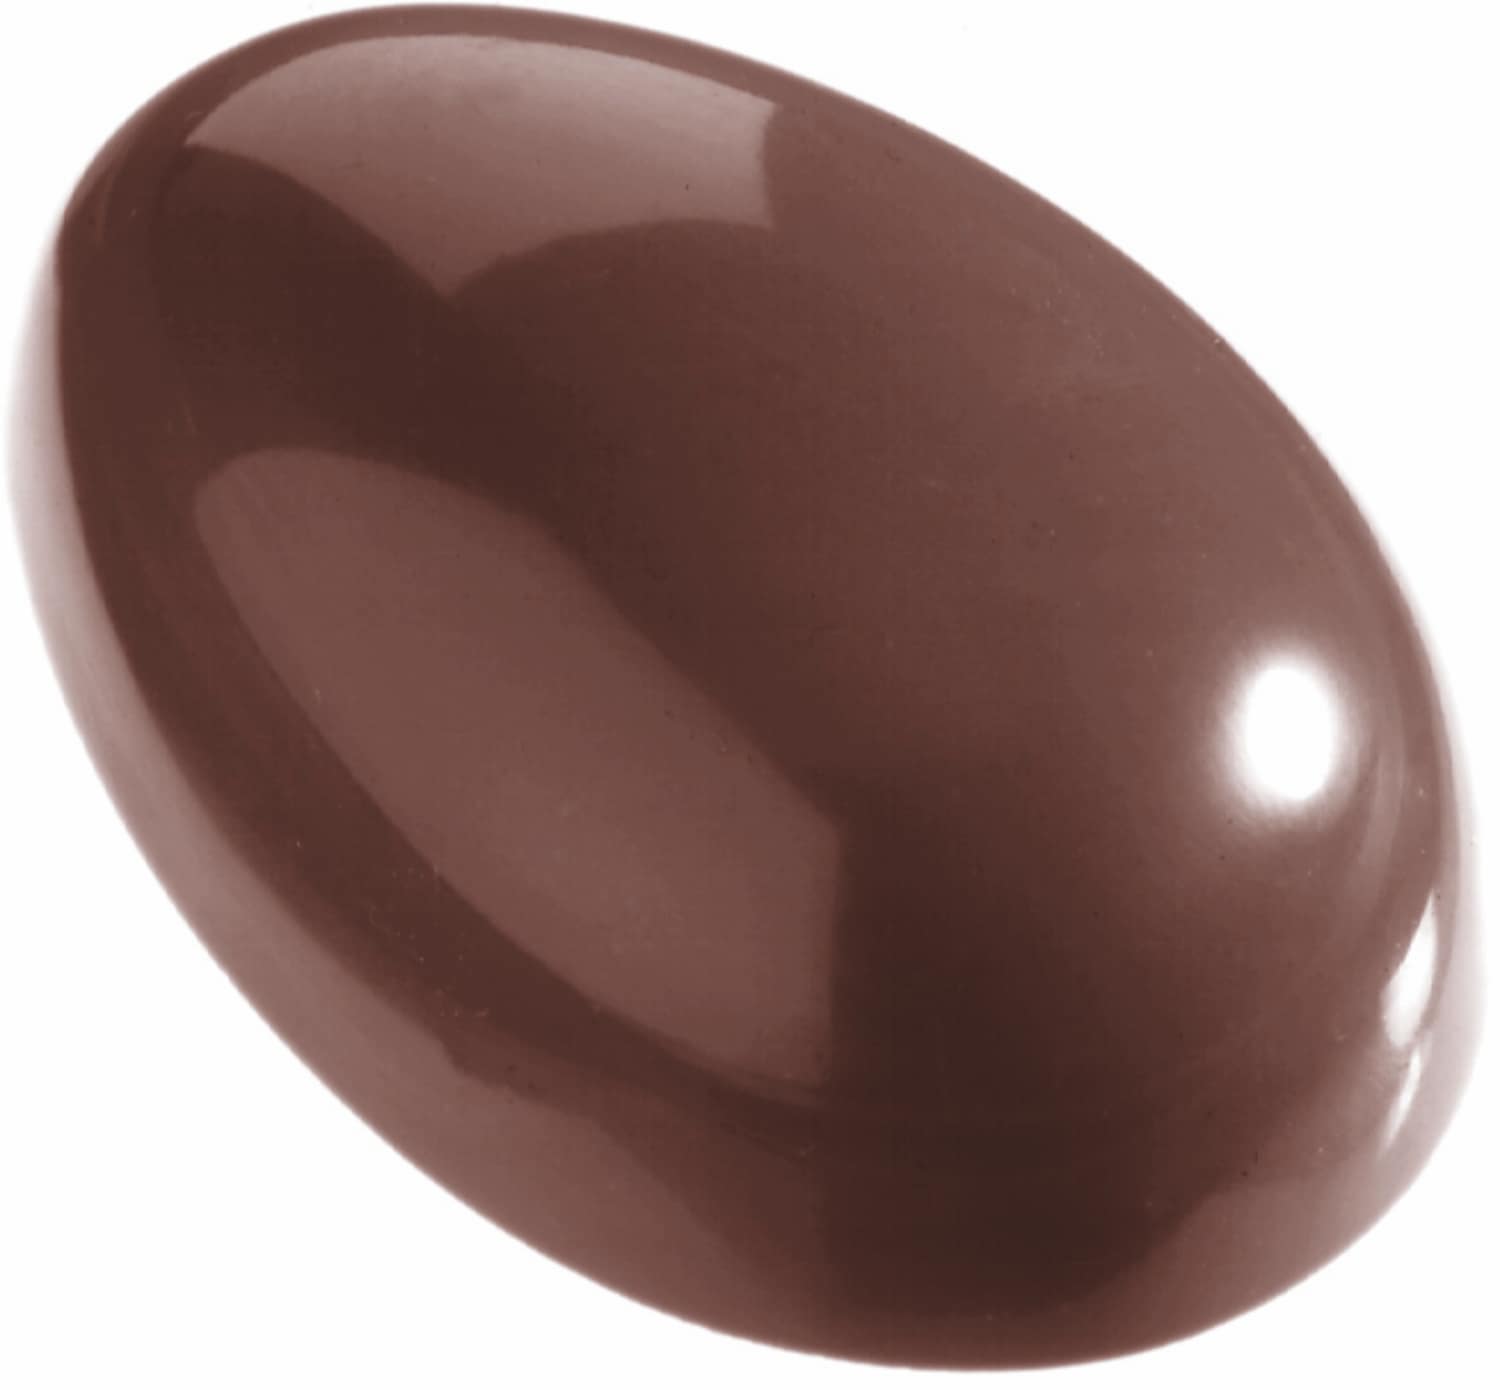 Chocolate mould "Easter egg" 421252 421252